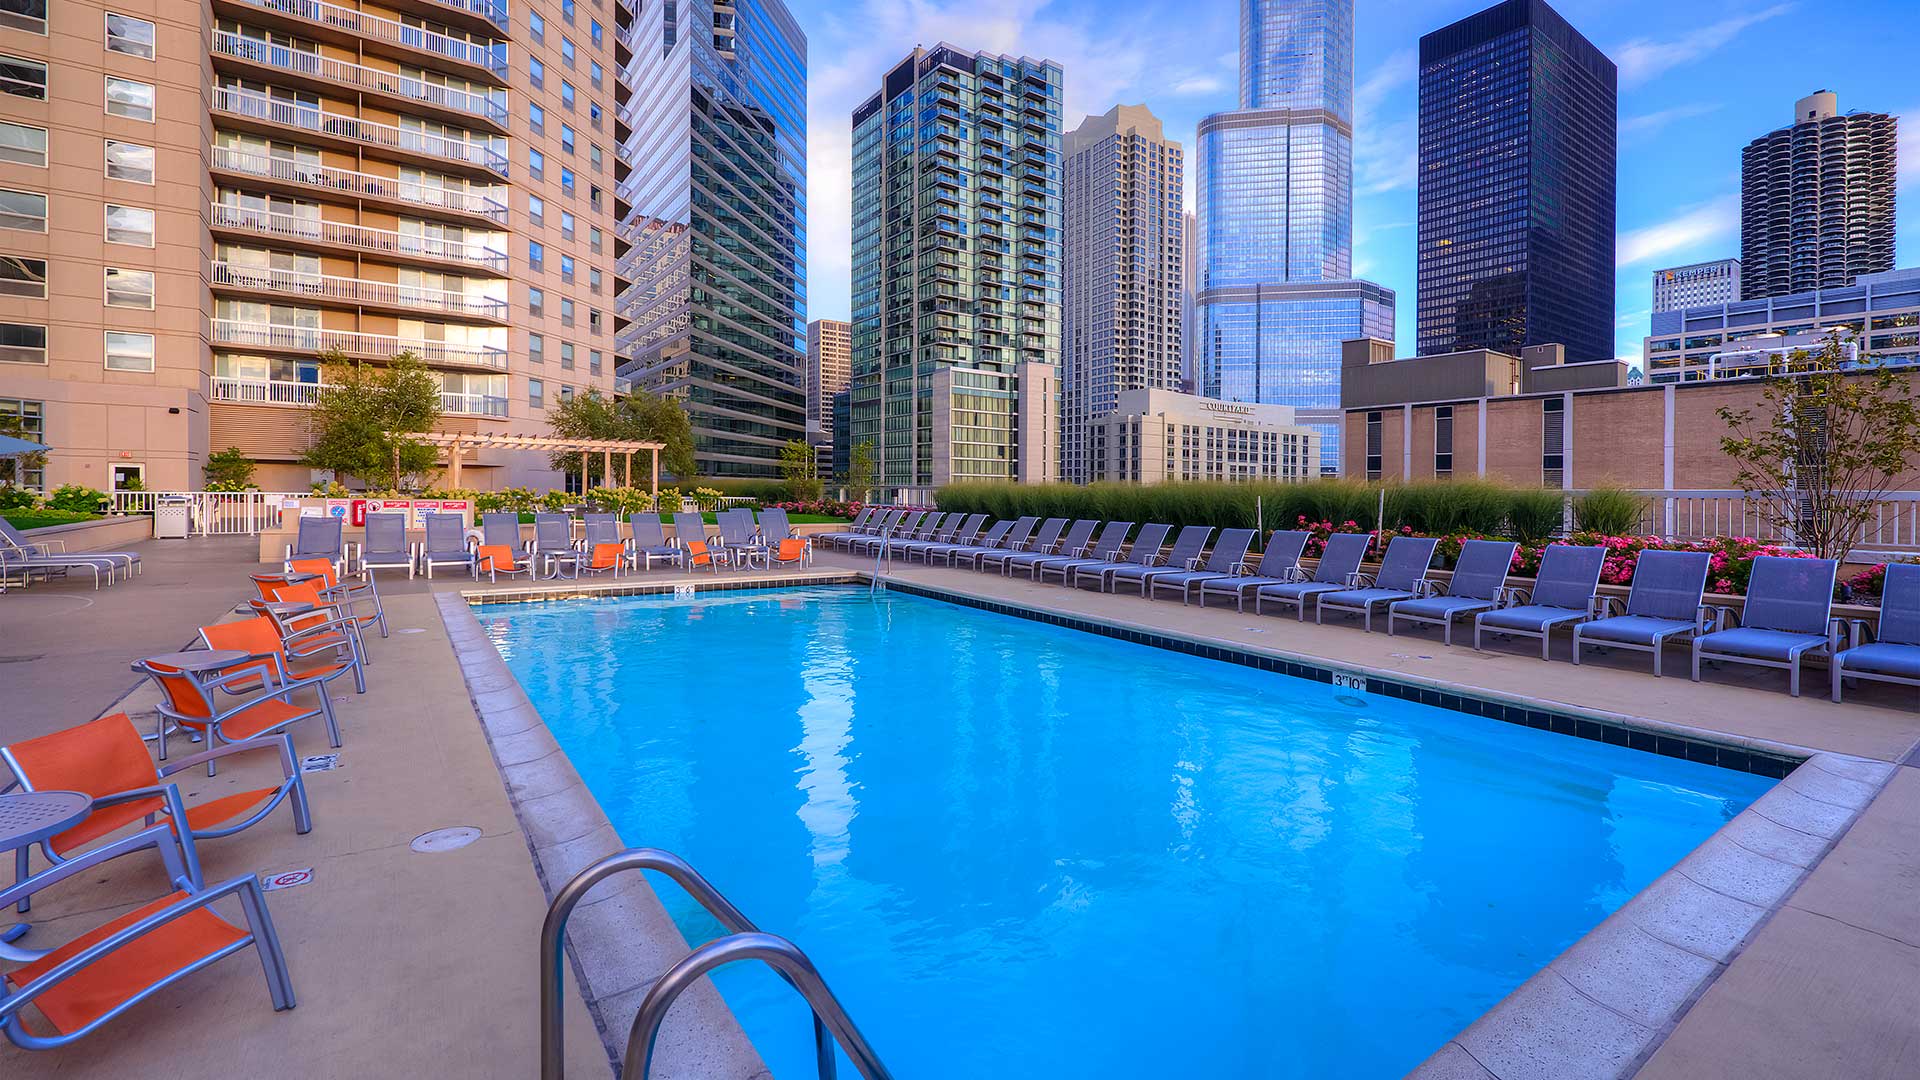 Looking across the outdoor pool late in the day. There are lounge chairs around the pool and the apartment tower rises off to the left. City buildings are seen beyond the deck to the right.